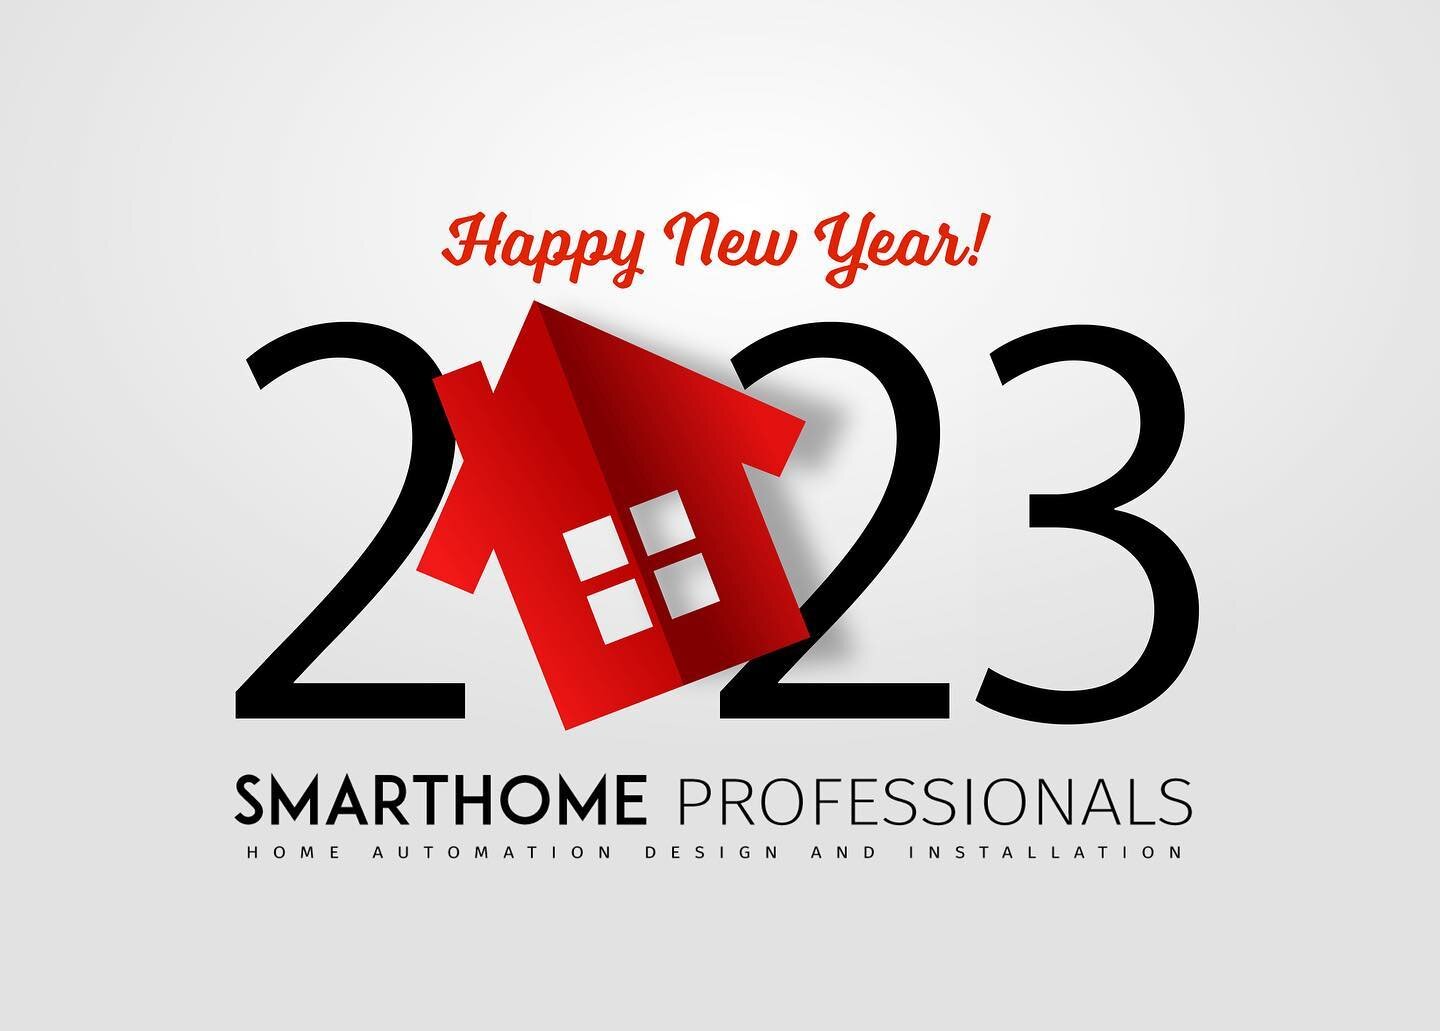 Happy New Year! Here&rsquo;s to a smarter home in 2023! 🎉

#homeautomation #smarthome #smarttechnology #smartlighting #homecinema #sonos #rako #control4 #lutron #russound #amina #mksound #triad